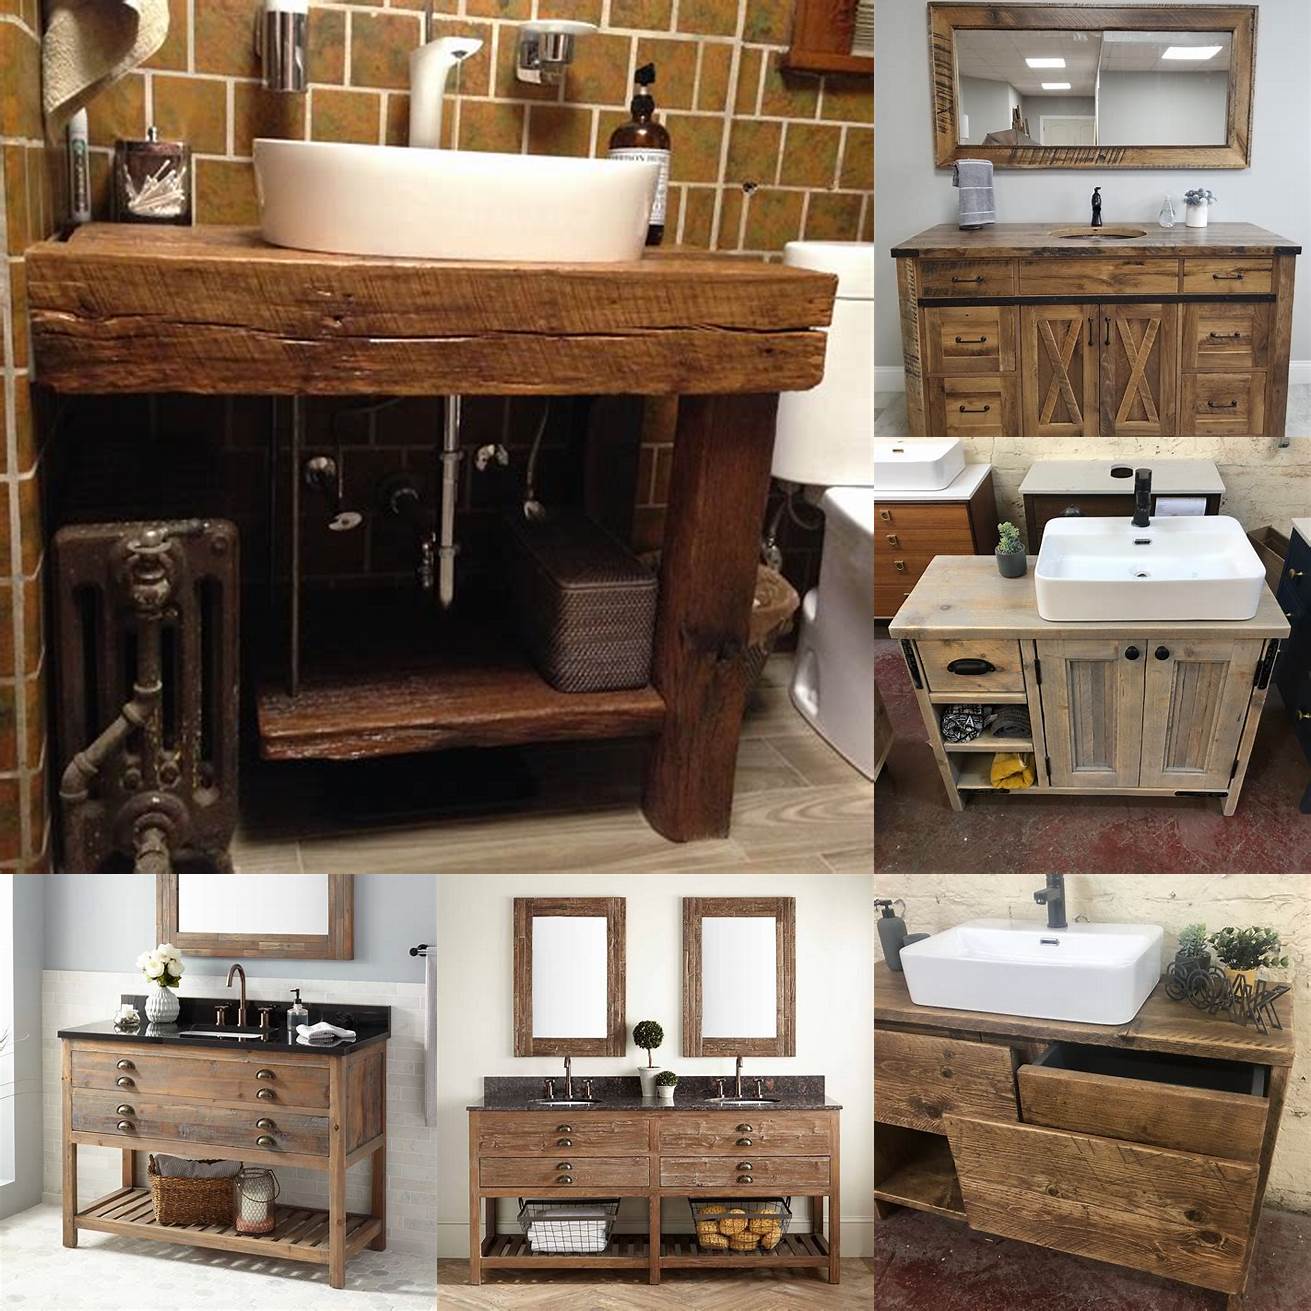 Reclaimed wood vanity with a modern sink and faucets